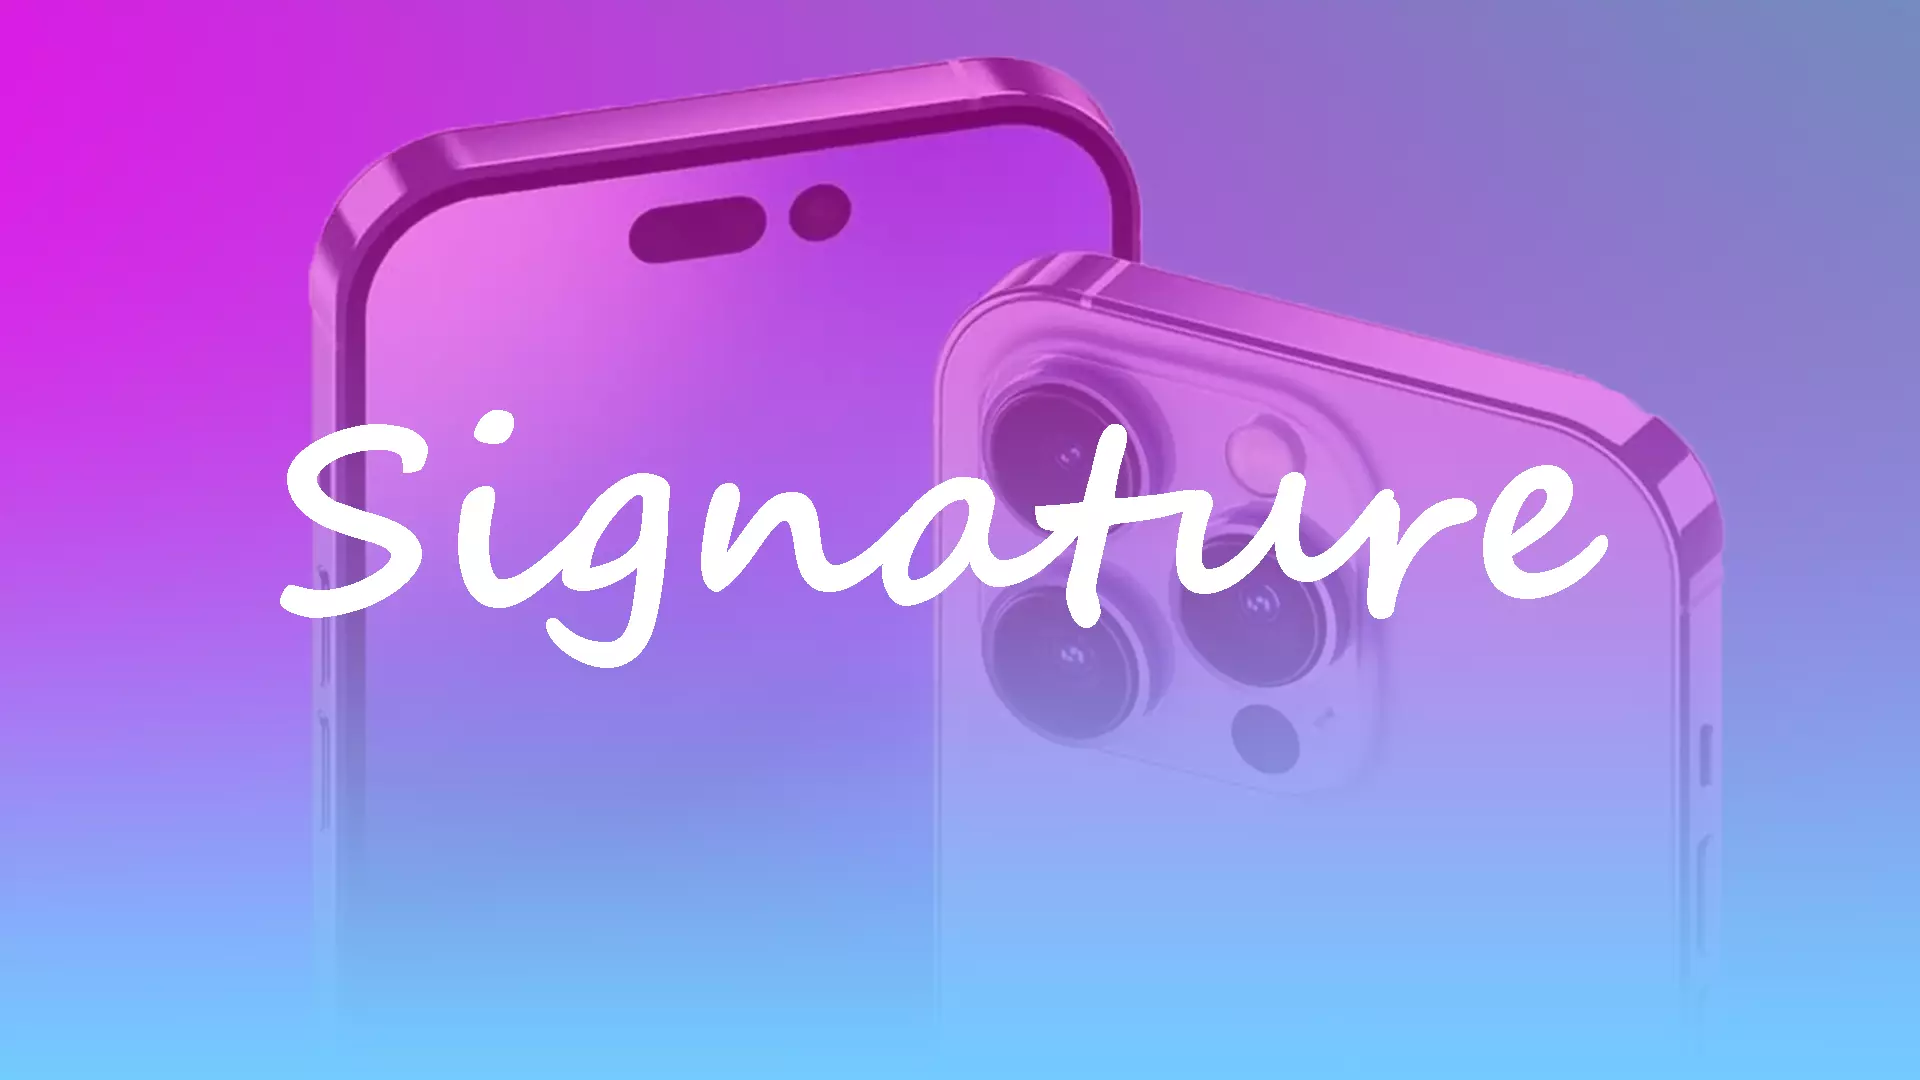 How to add a signature to a text message on iPhone